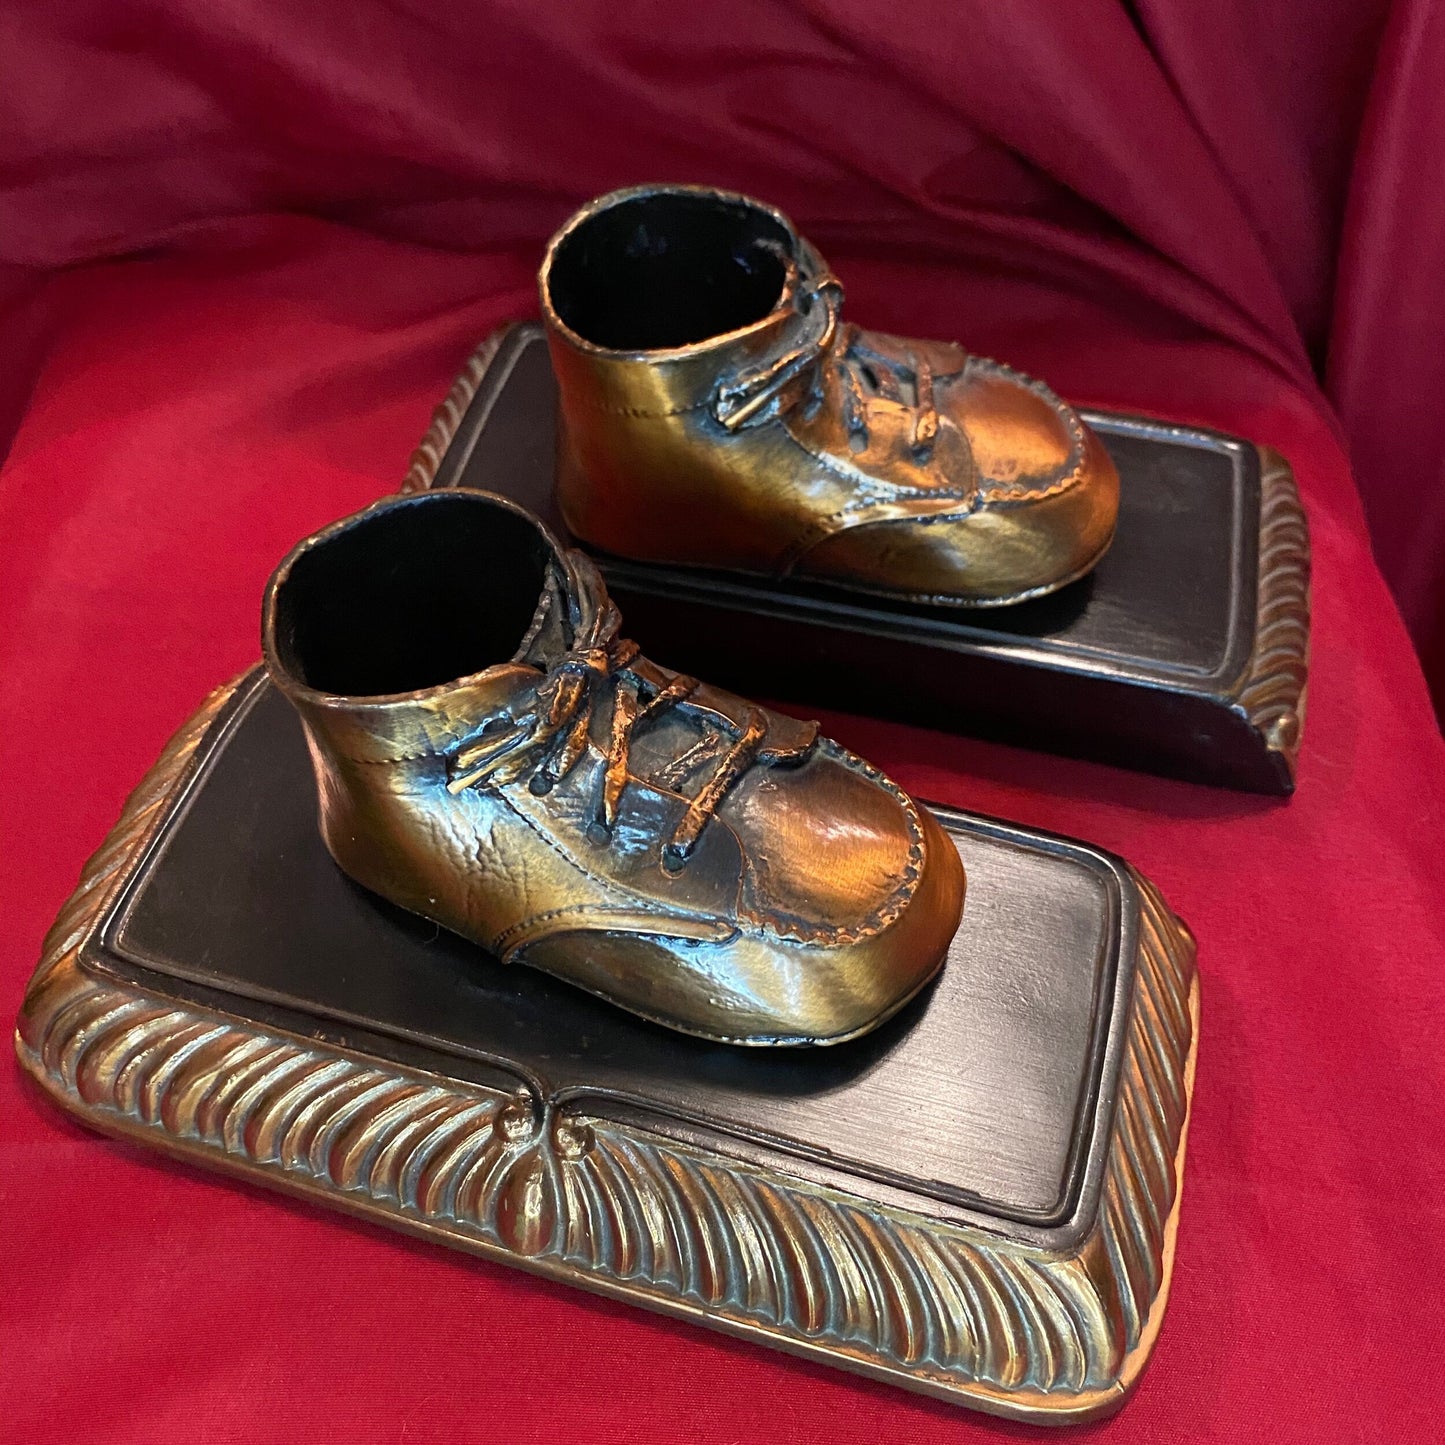 Vintage Copper Bronzed Baby Shoe Bookends